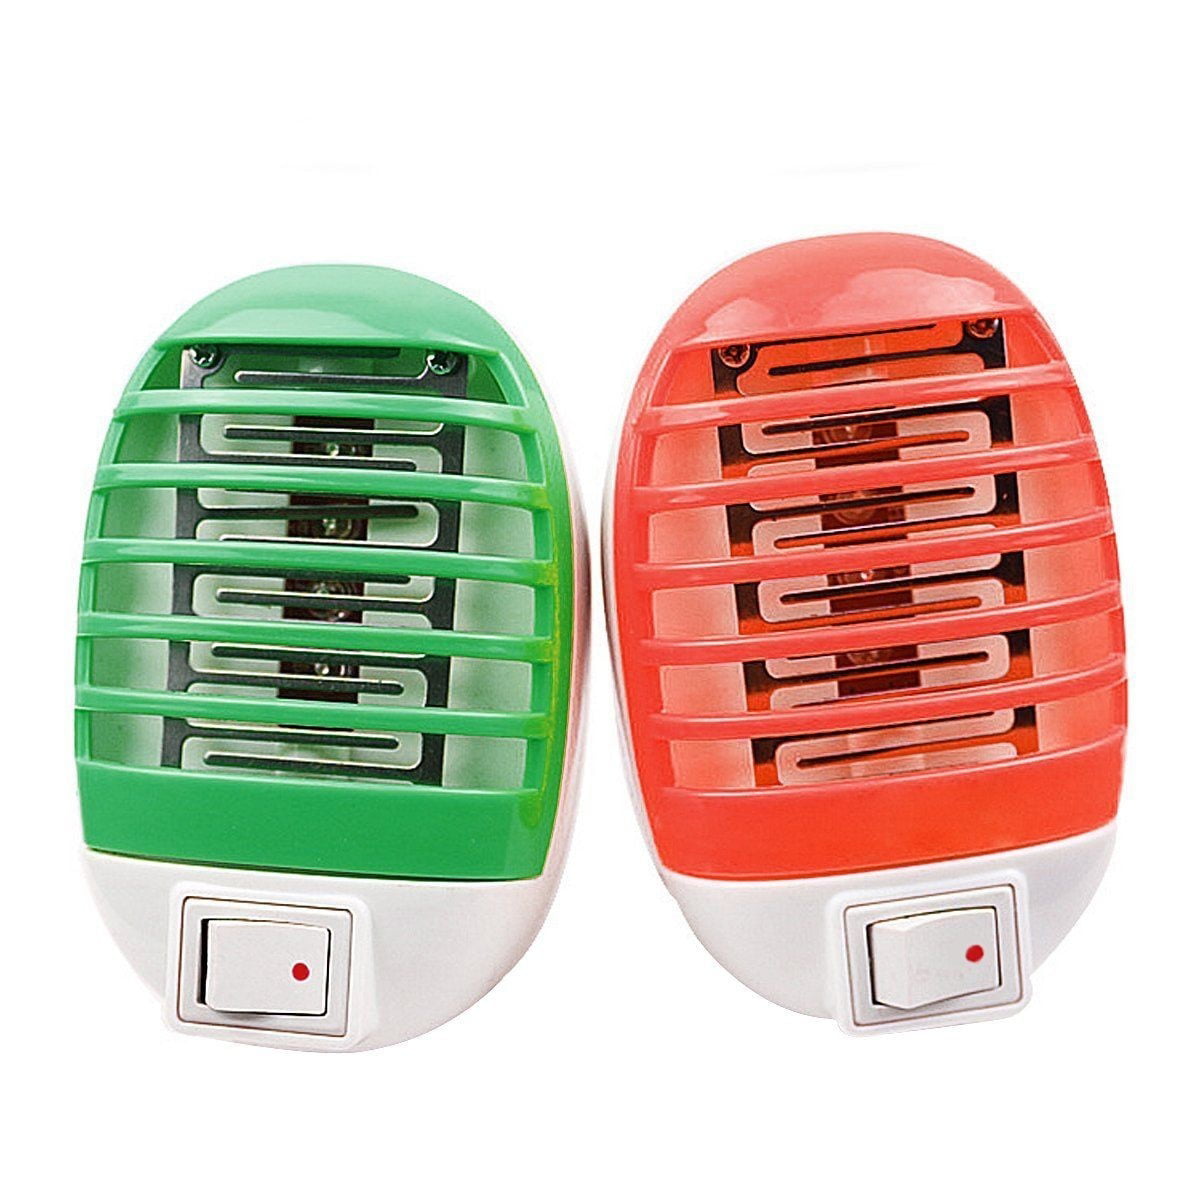 LED Electric Mosquito Fly Pest Bug Insect Zapper Trap Killer Night Lamp USA Plug 